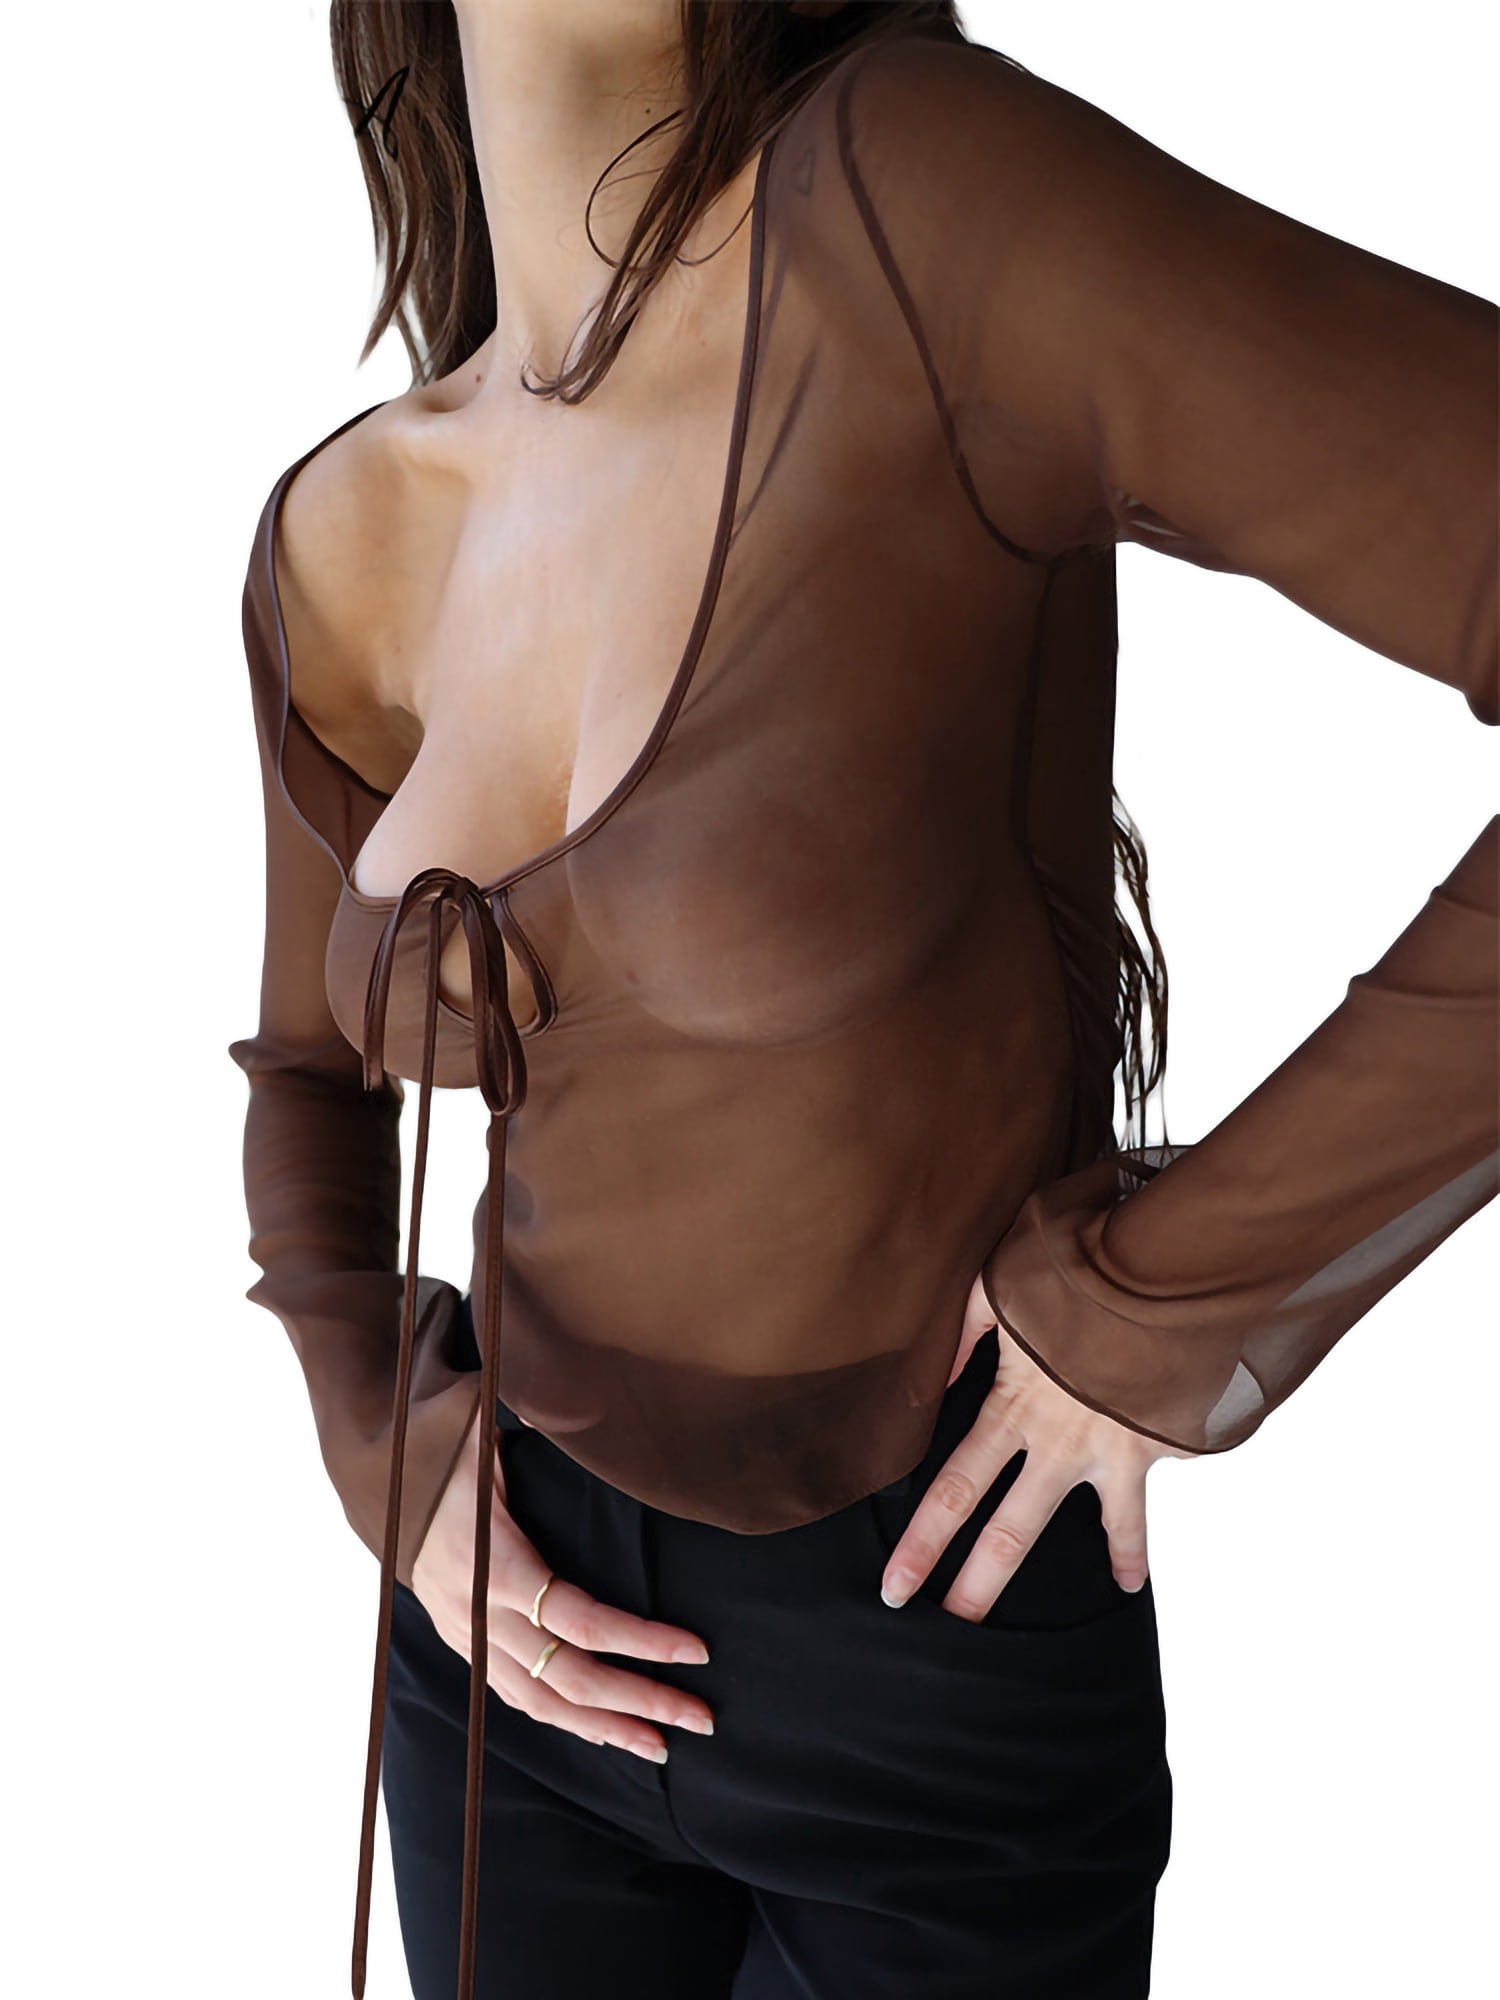 carmen neufeld recommends see through blouse pic